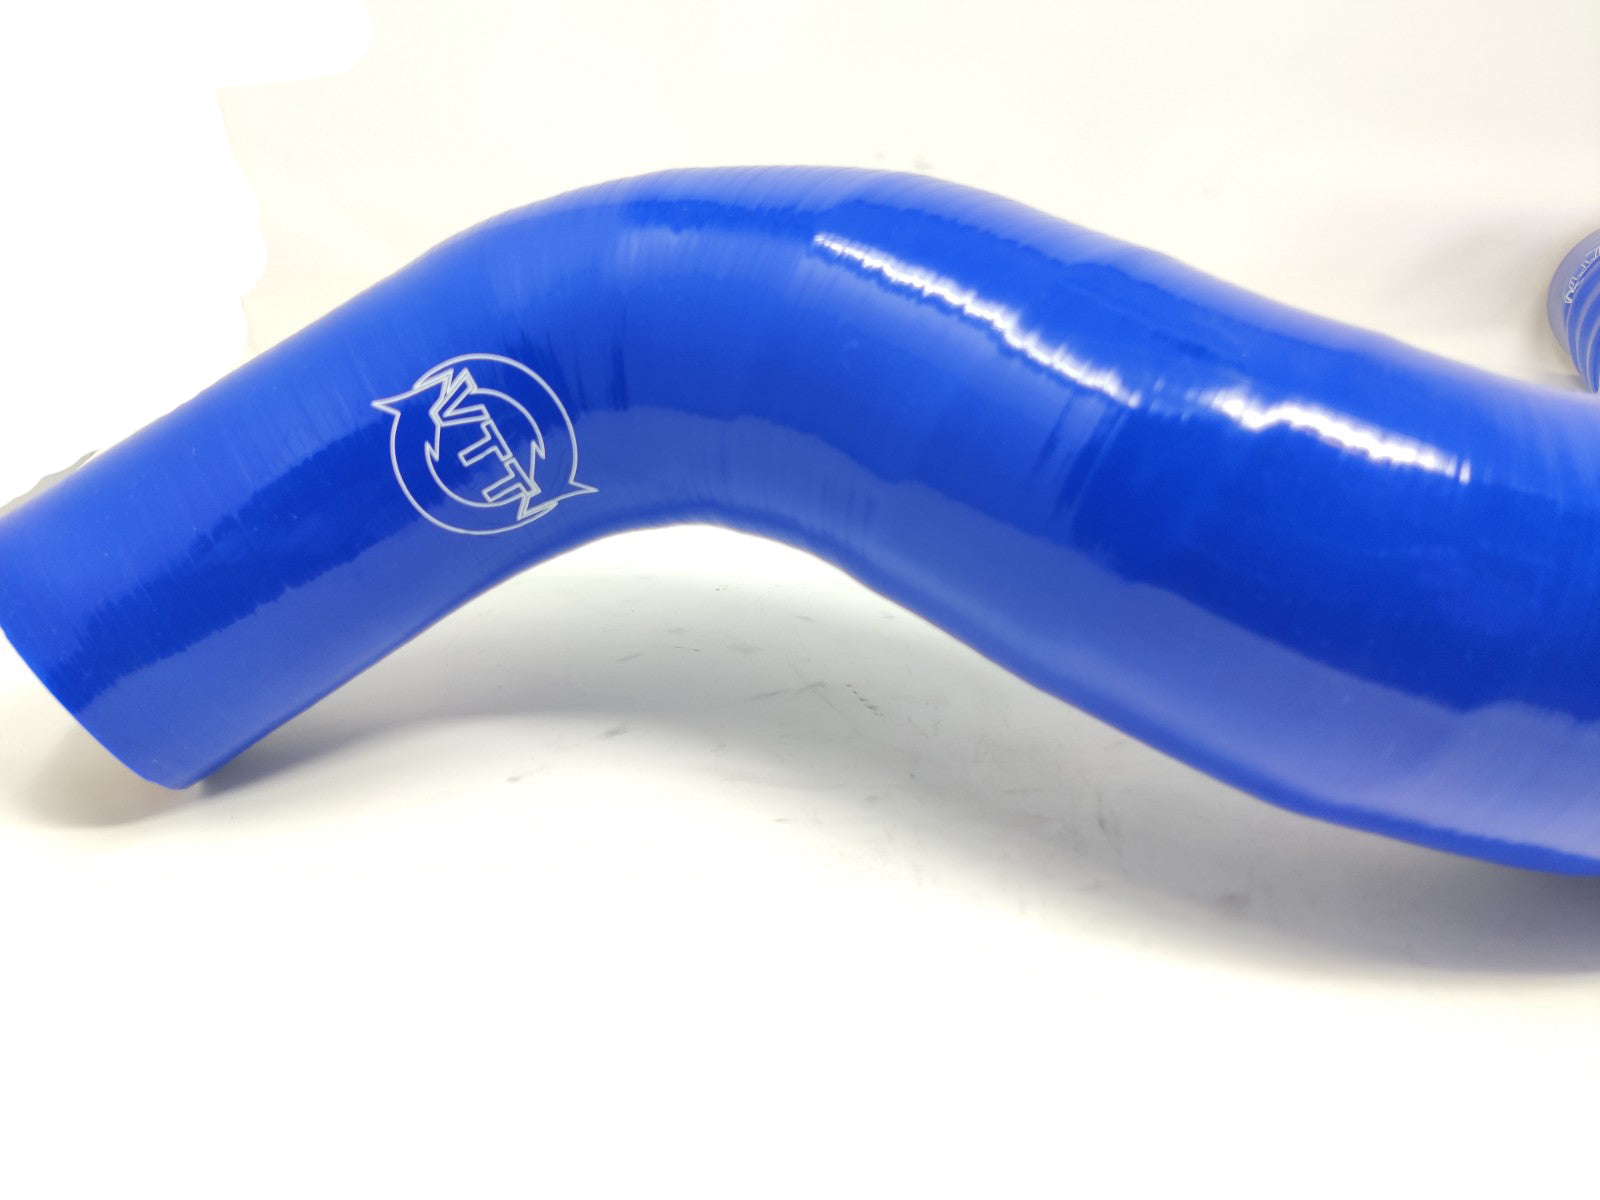 VTT 8V RS3/8S TTRS Silicone Charge pipes